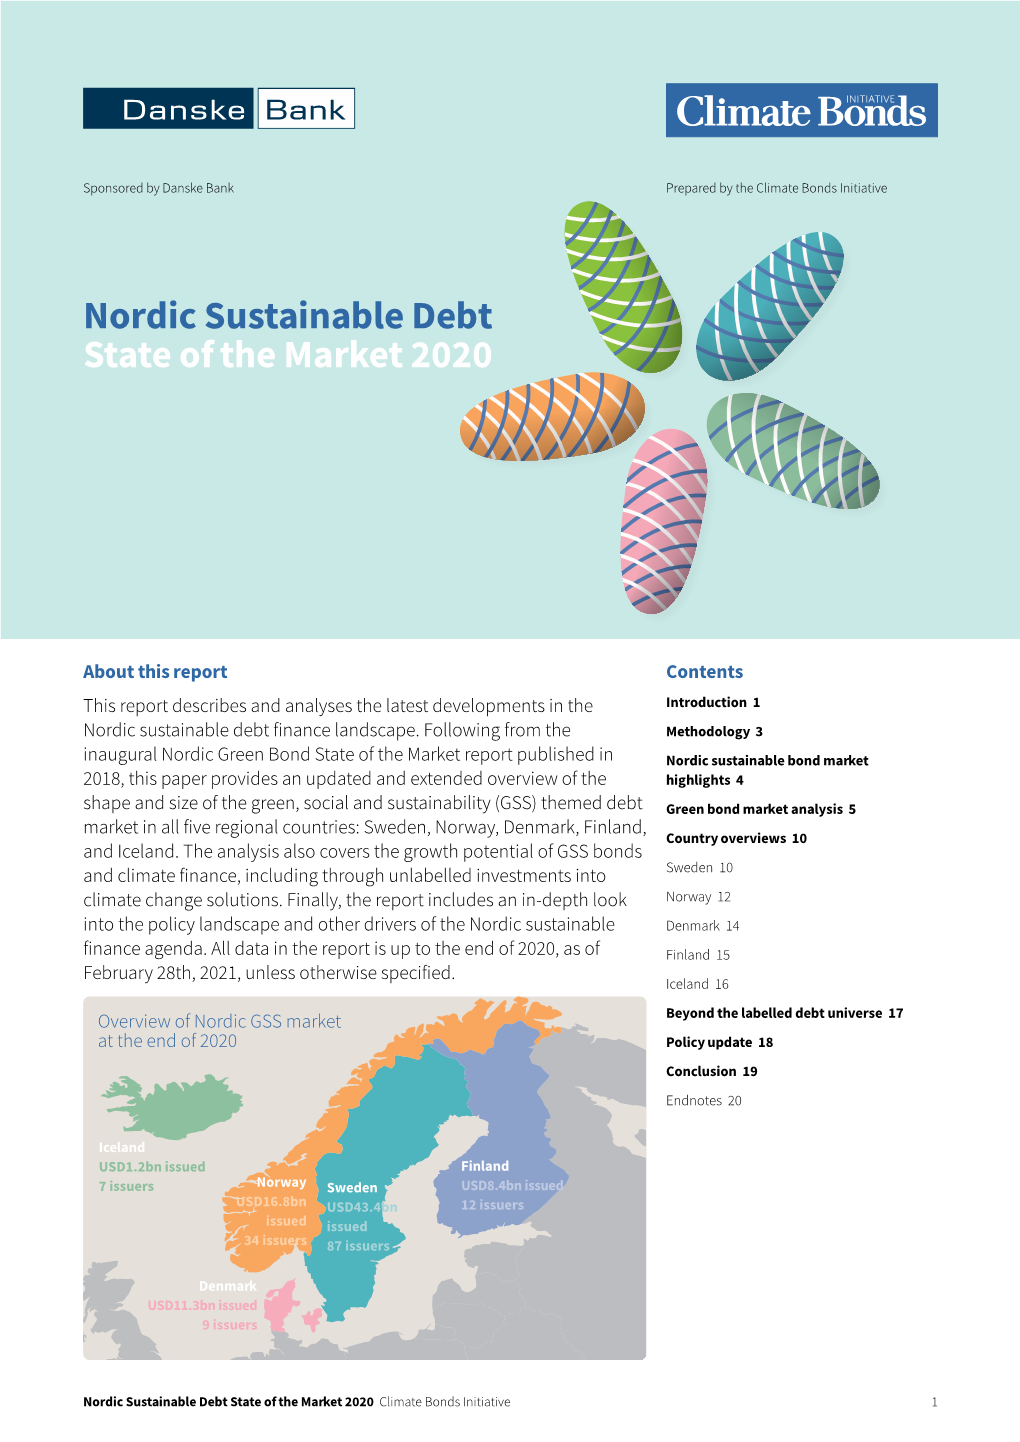 Nordic Sustainable Debt State of the Market 2020